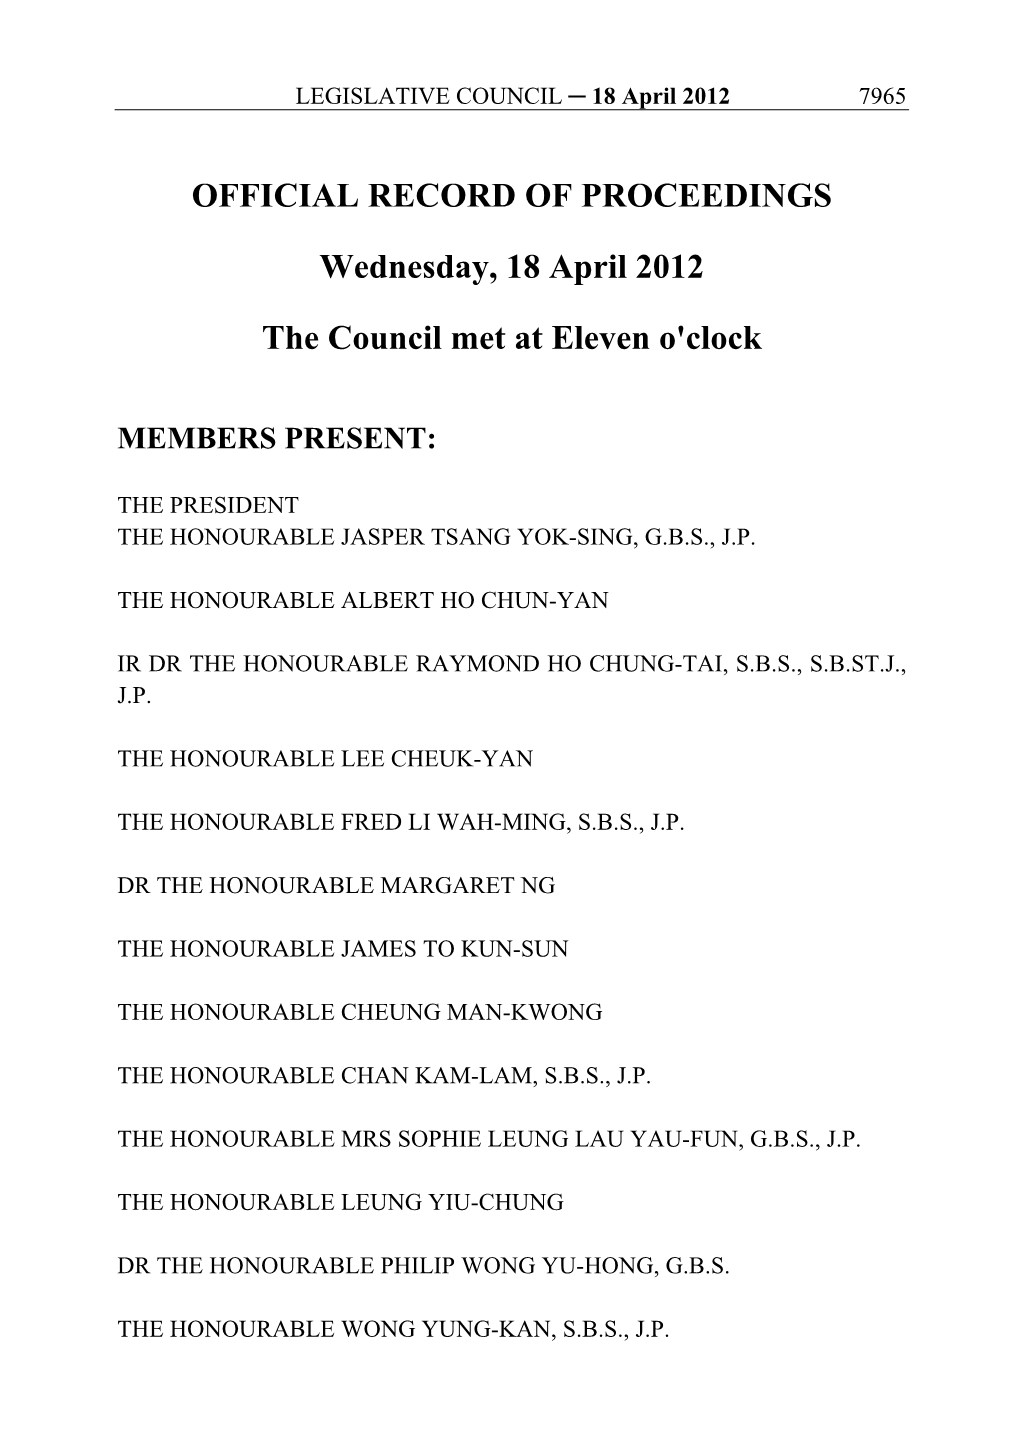 OFFICIAL RECORD of PROCEEDINGS Wednesday, 18 April 2012 the Council Met at Eleven O'clock